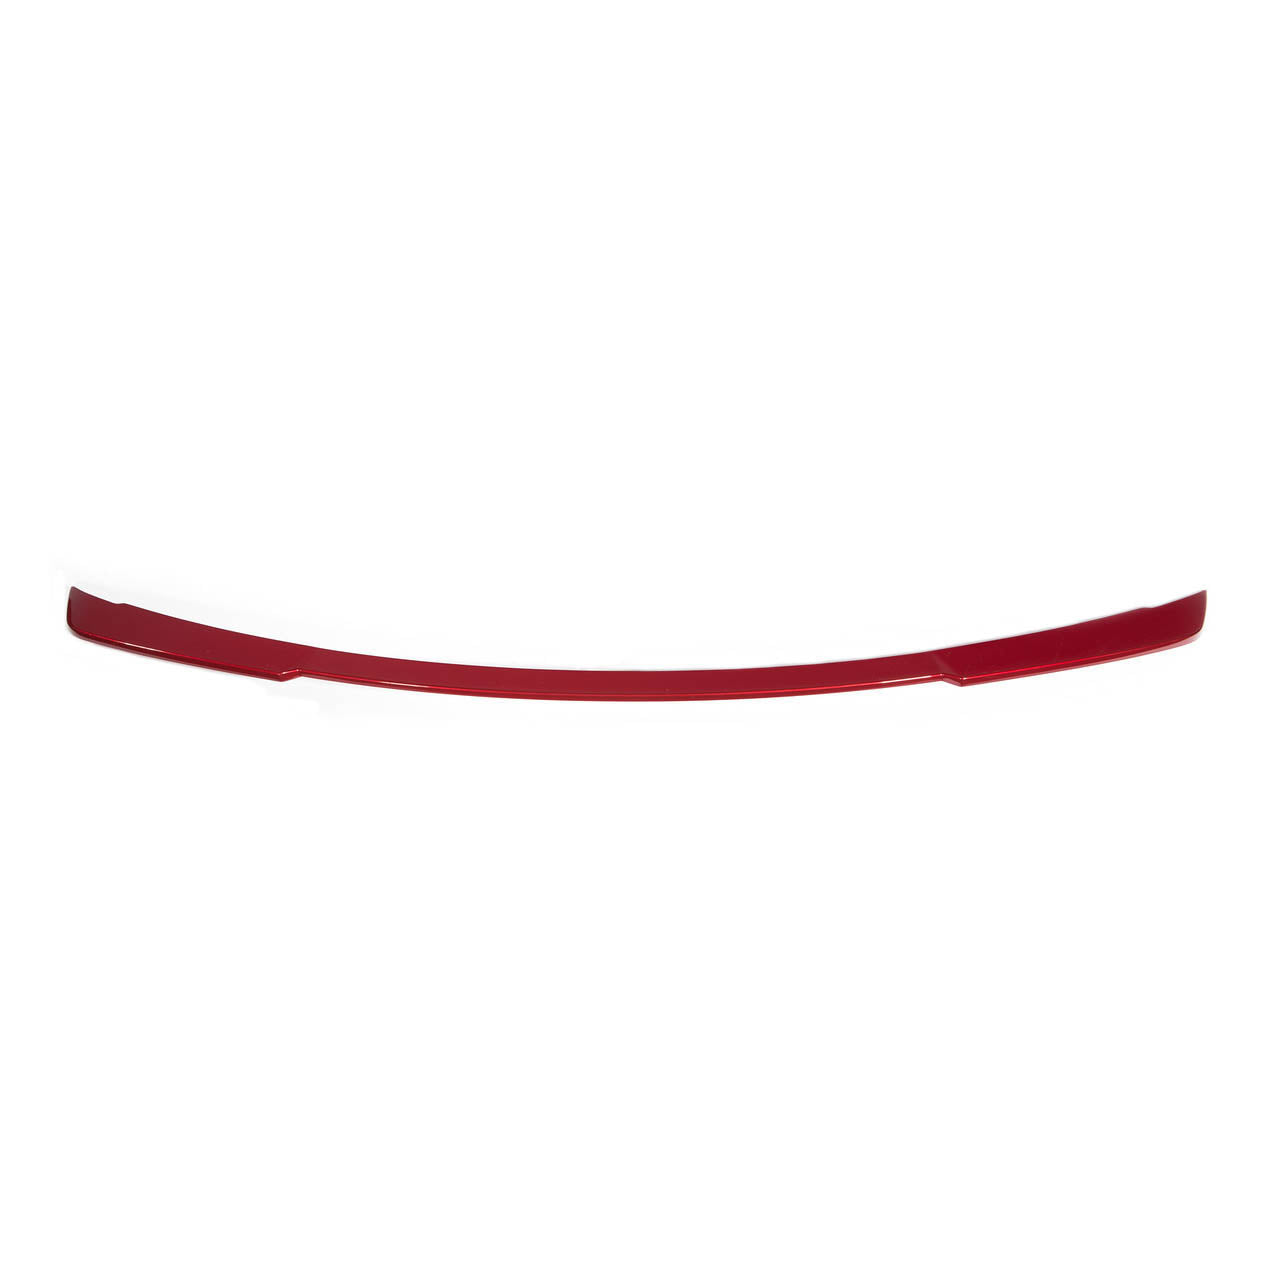 ROUSH 2015-20 Rear Wing / Spoiler ( Ruby Red )  Part Number (421890)